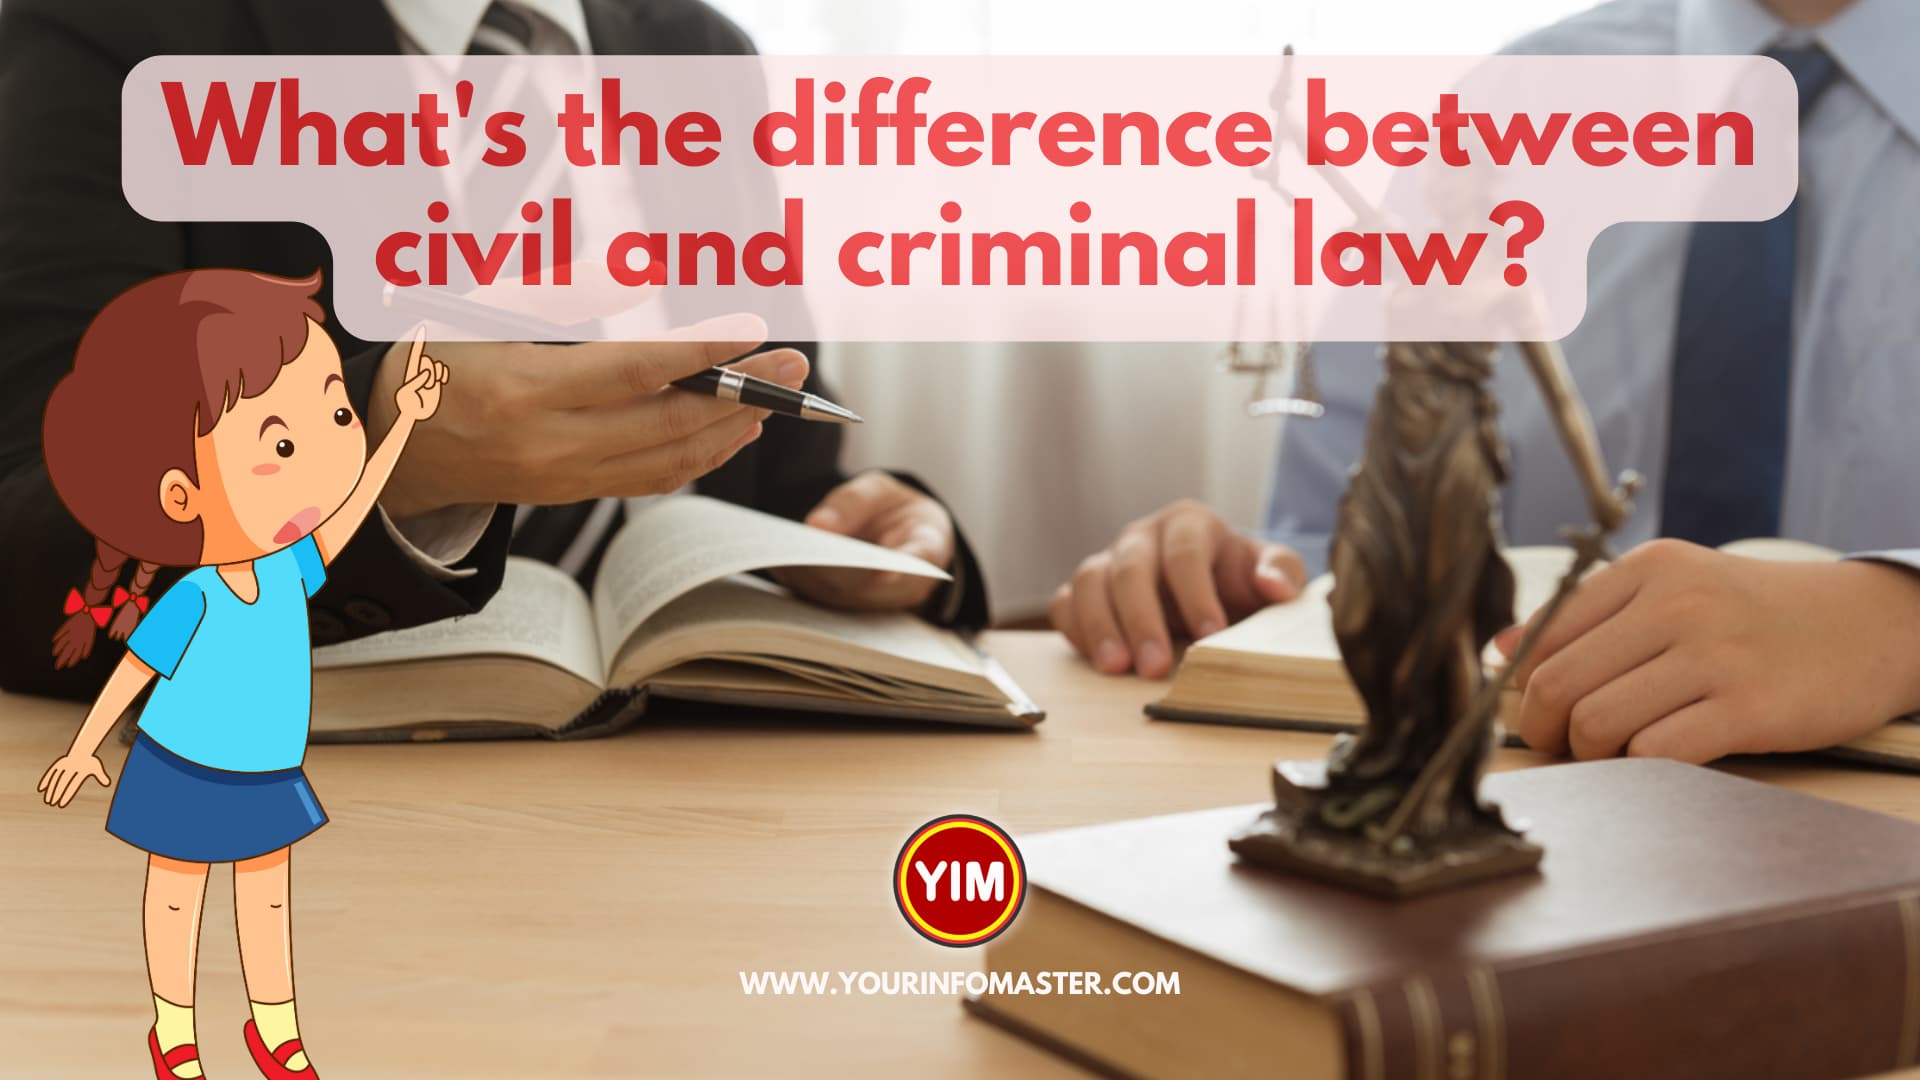 What's the difference between civil and criminal law